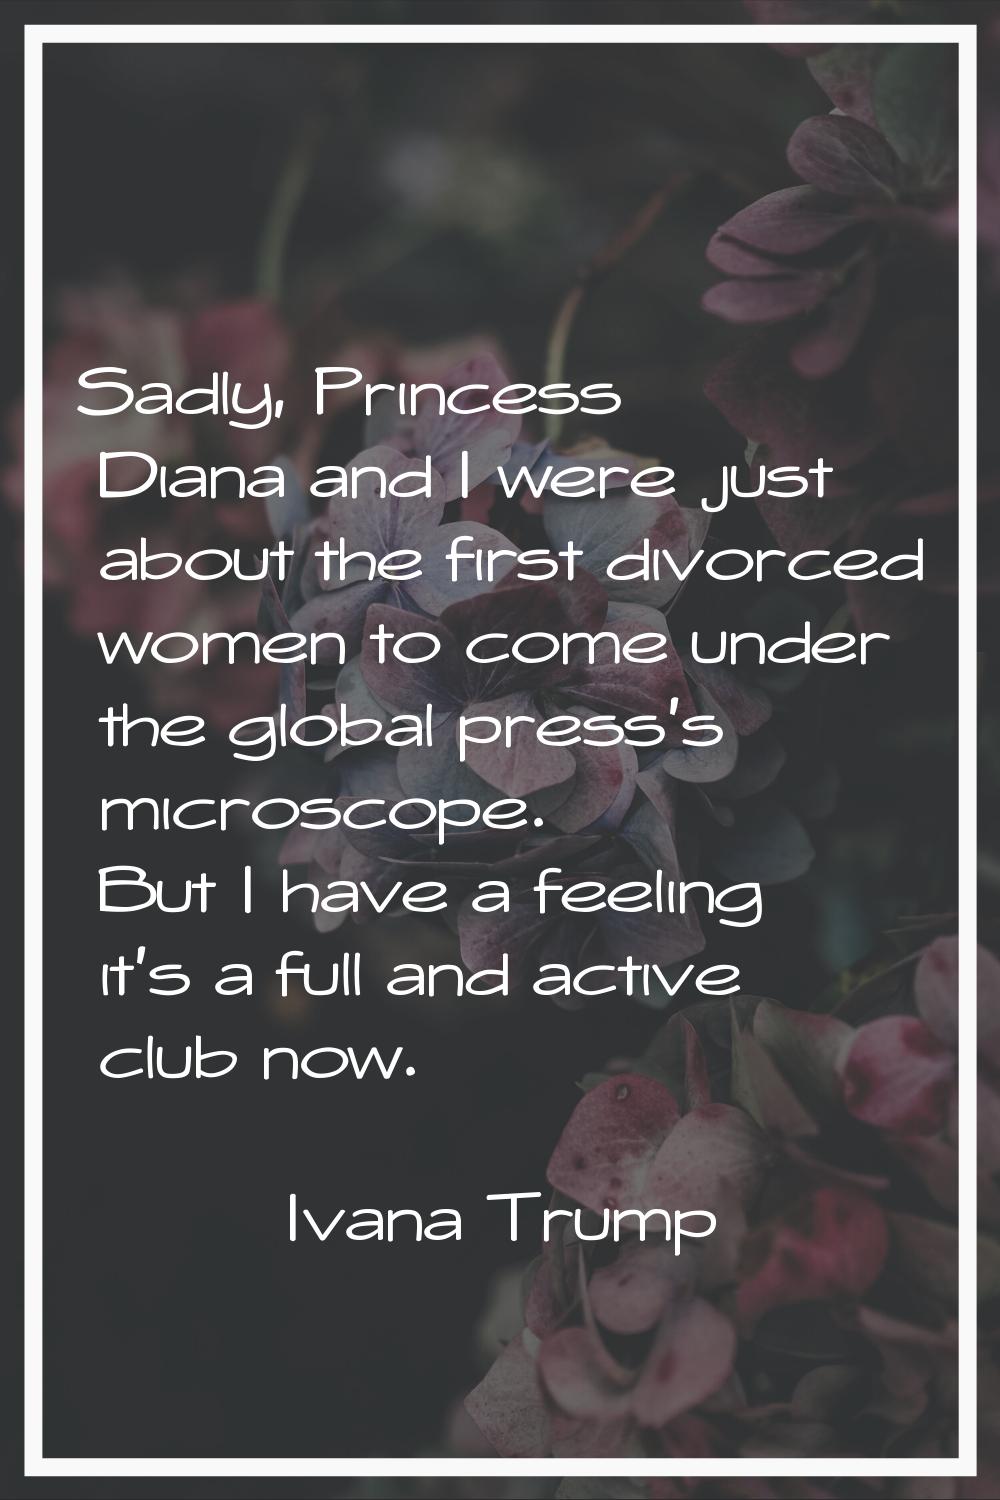 Sadly, Princess Diana and I were just about the first divorced women to come under the global press